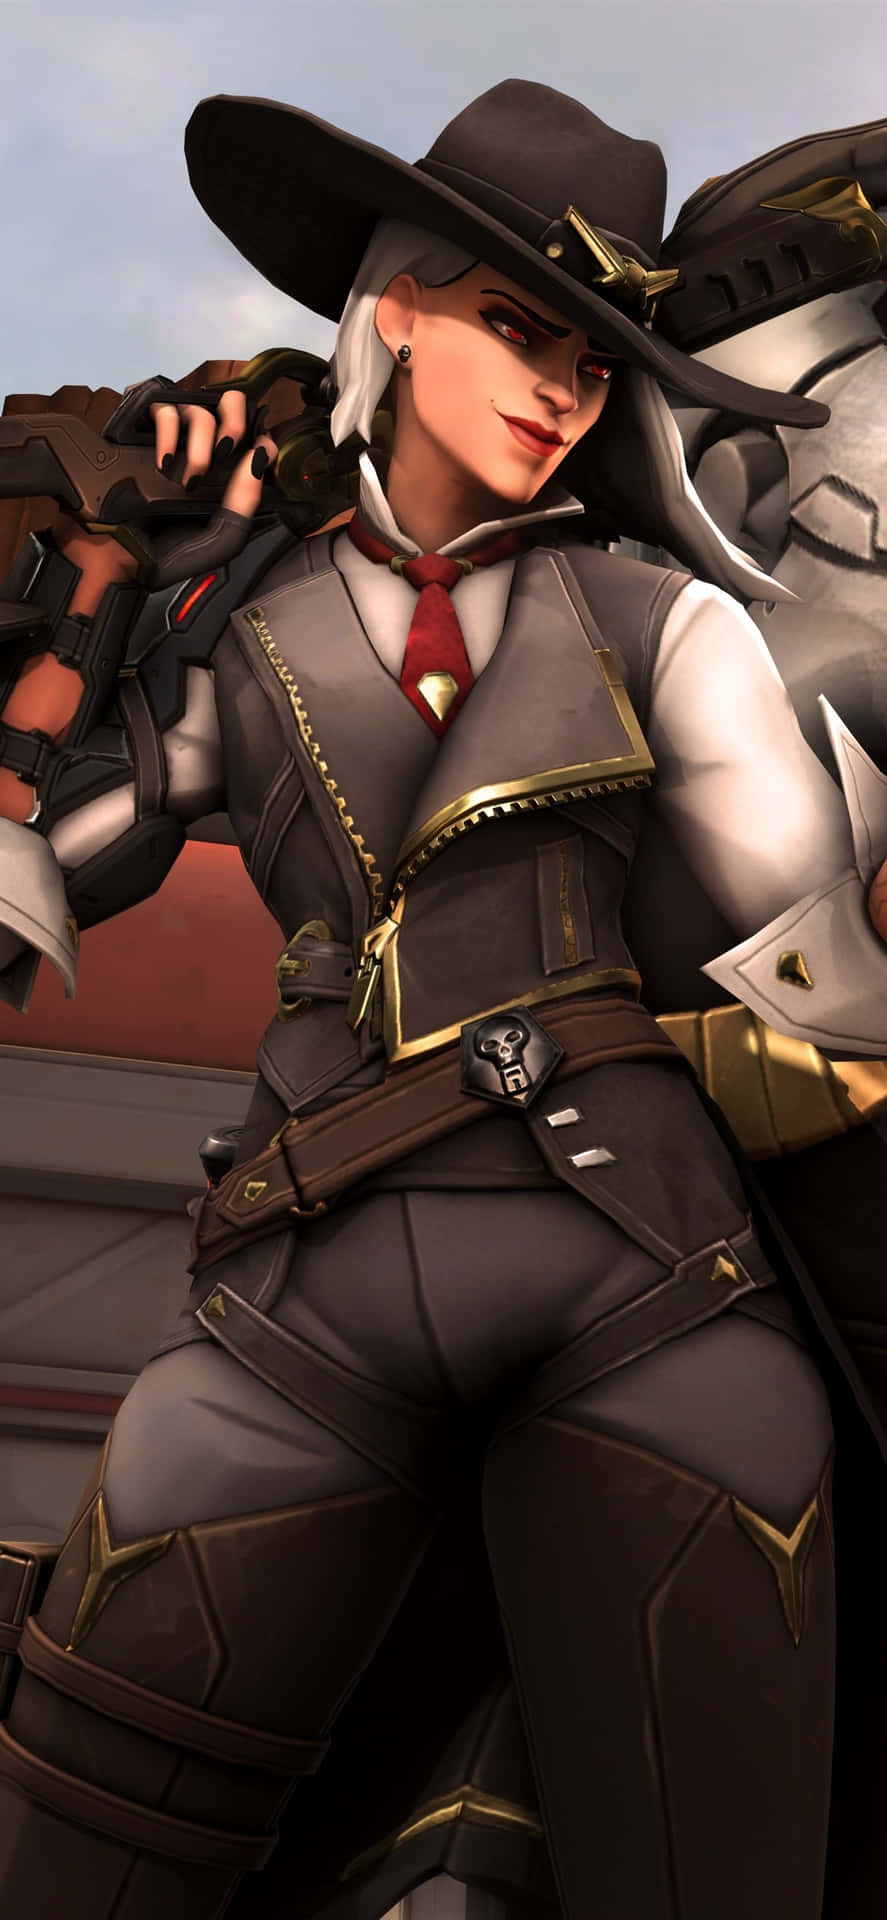 Iphone Xs Max Overwatch Background Ashe Cowboy Background